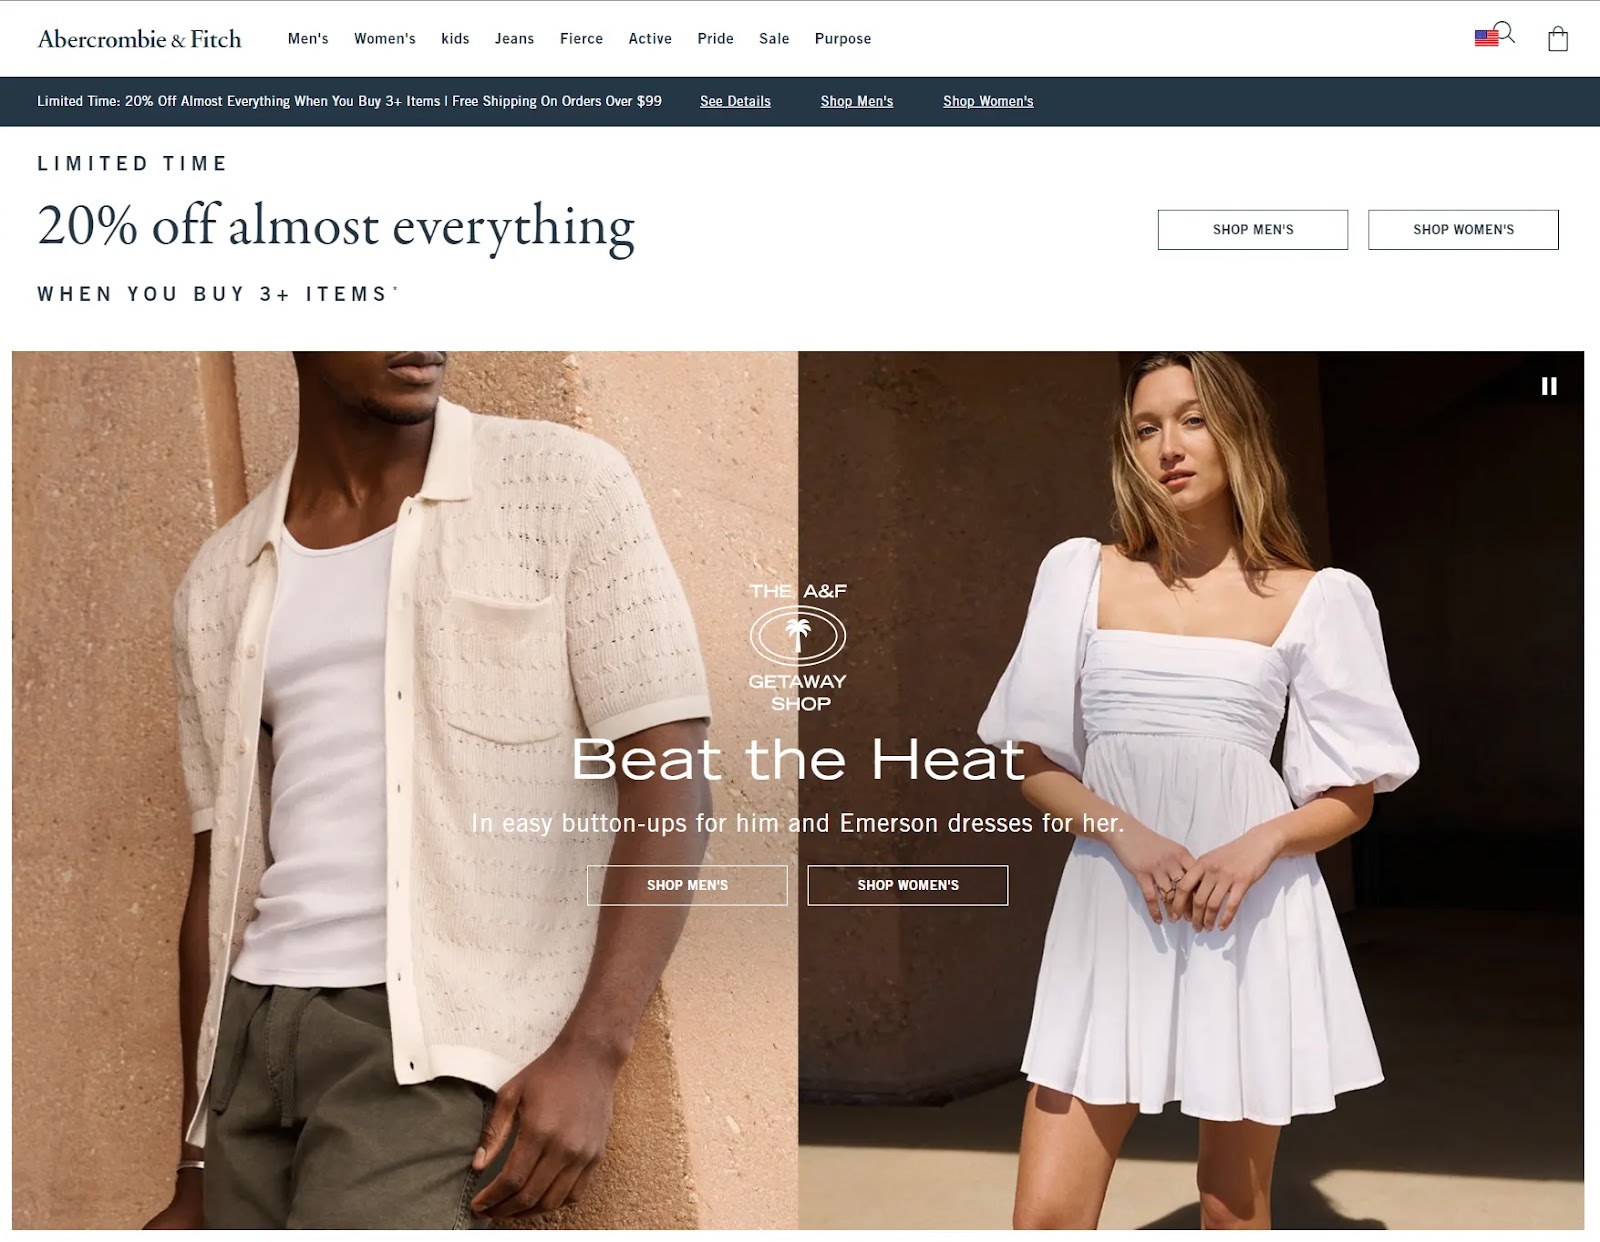 Abercrombie & Fitch's section of the website